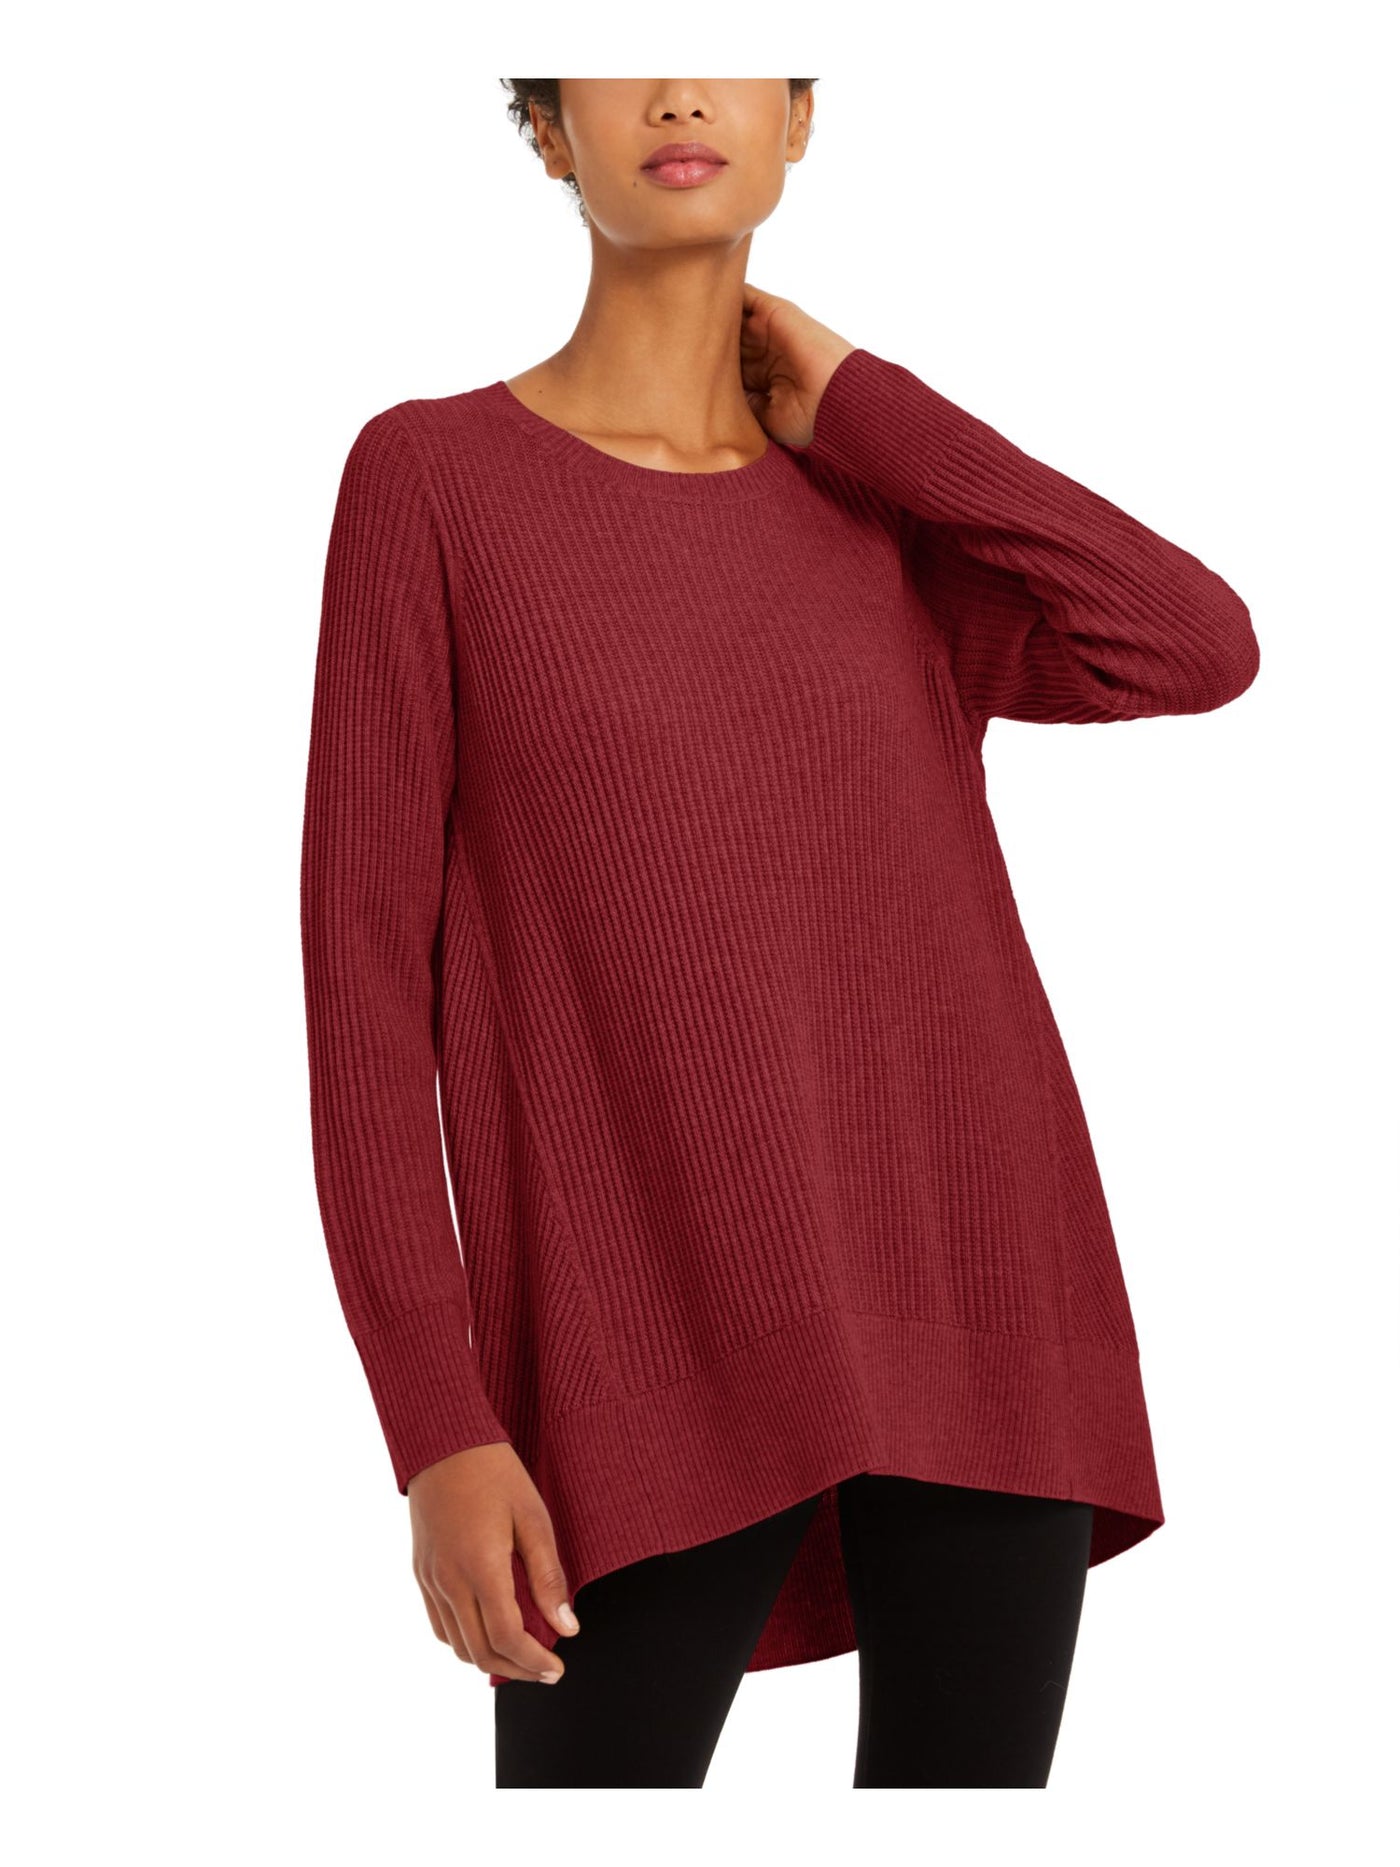 EILEEN FISHER Womens Red Textured Pinstripe Crew Neck Tunic Sweater PP